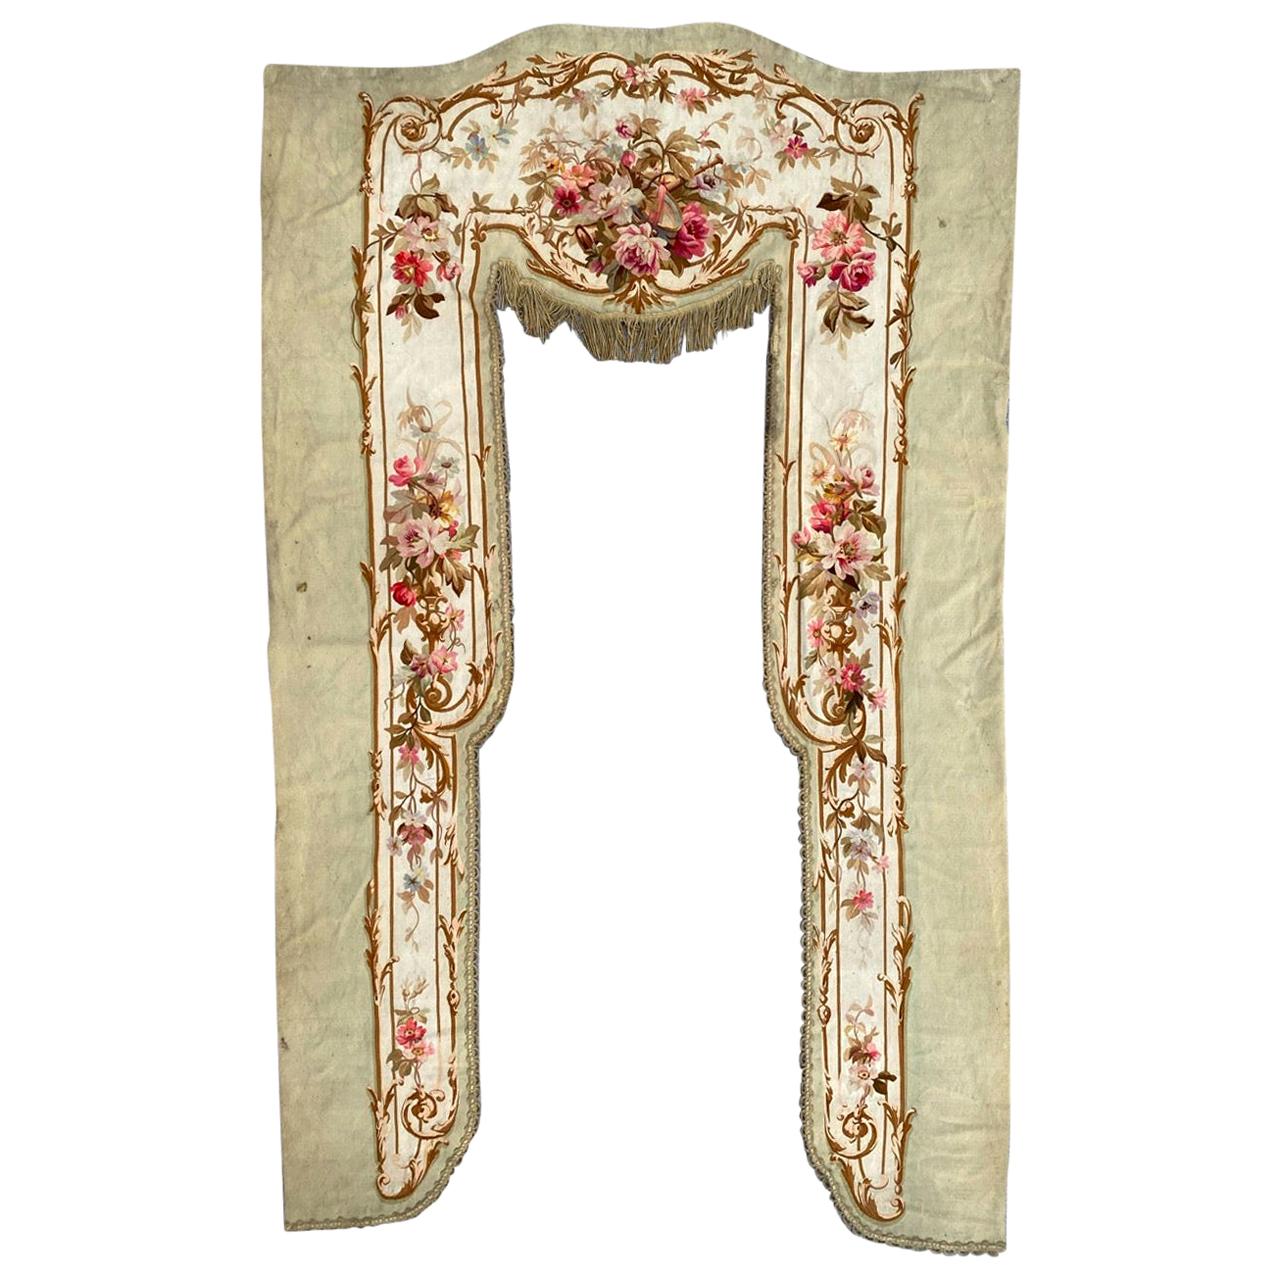 Bobyrug's Wonderful French Valance Aubusson Tapestry (Tapisserie d'Aubusson)